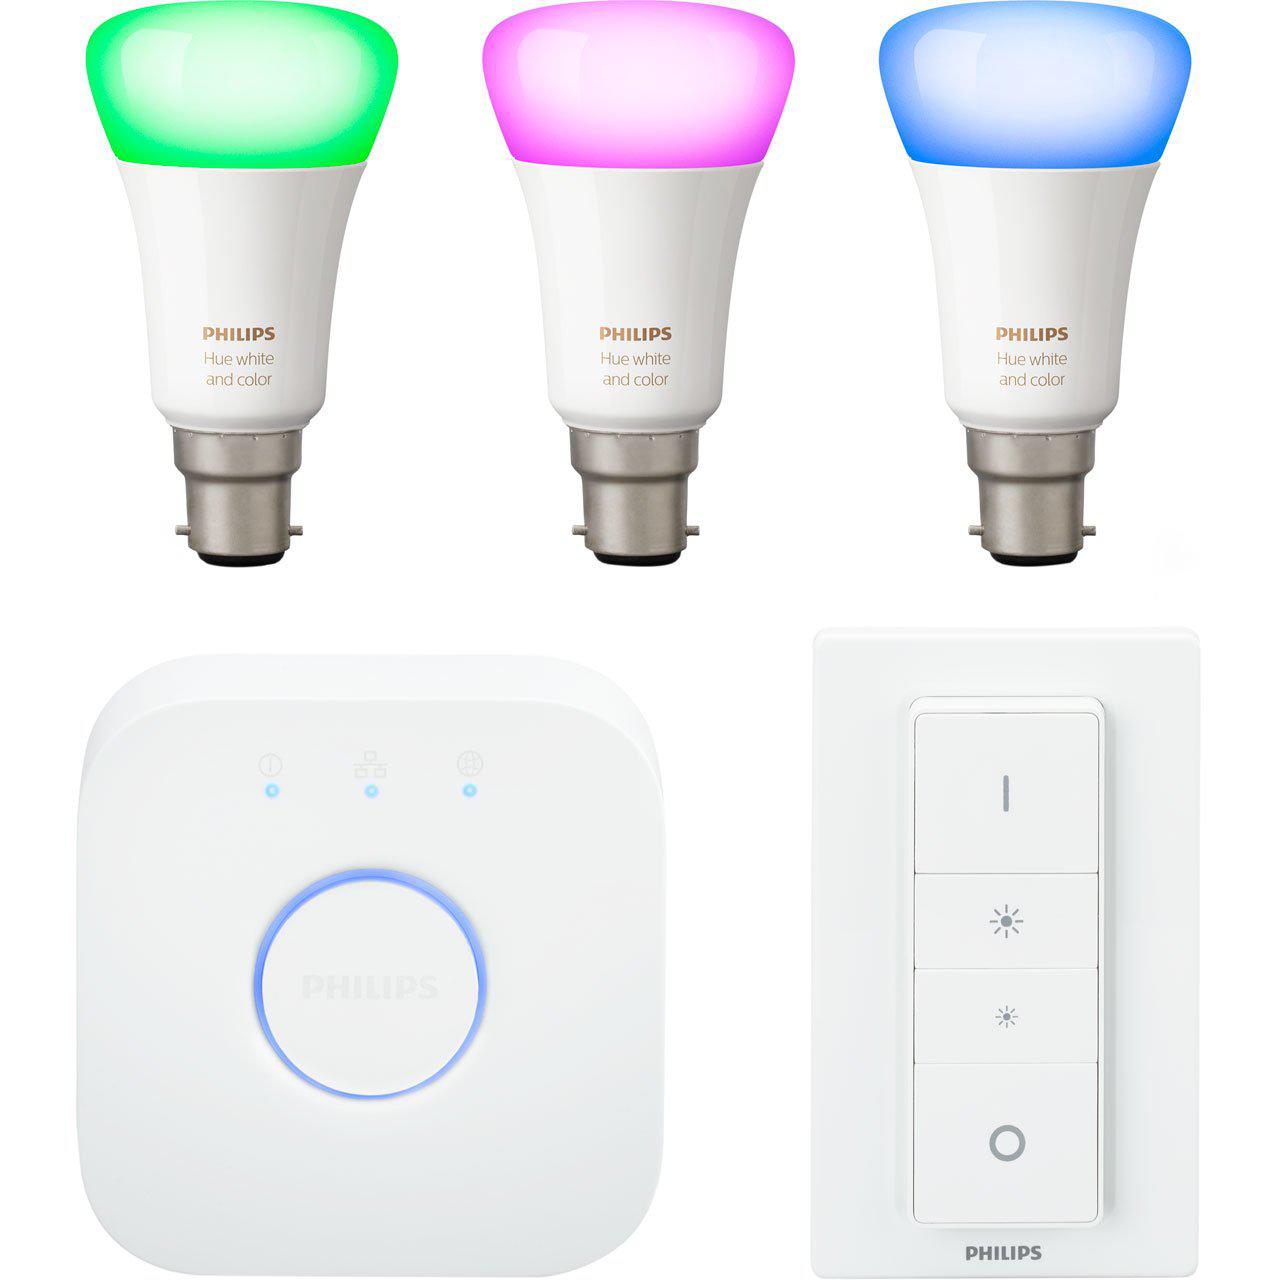 Philips Hue White and Colour Ambiance Wireless Lighting LED Starter Kit with 3 Bulbs, 10W B22 Bayonet Cap